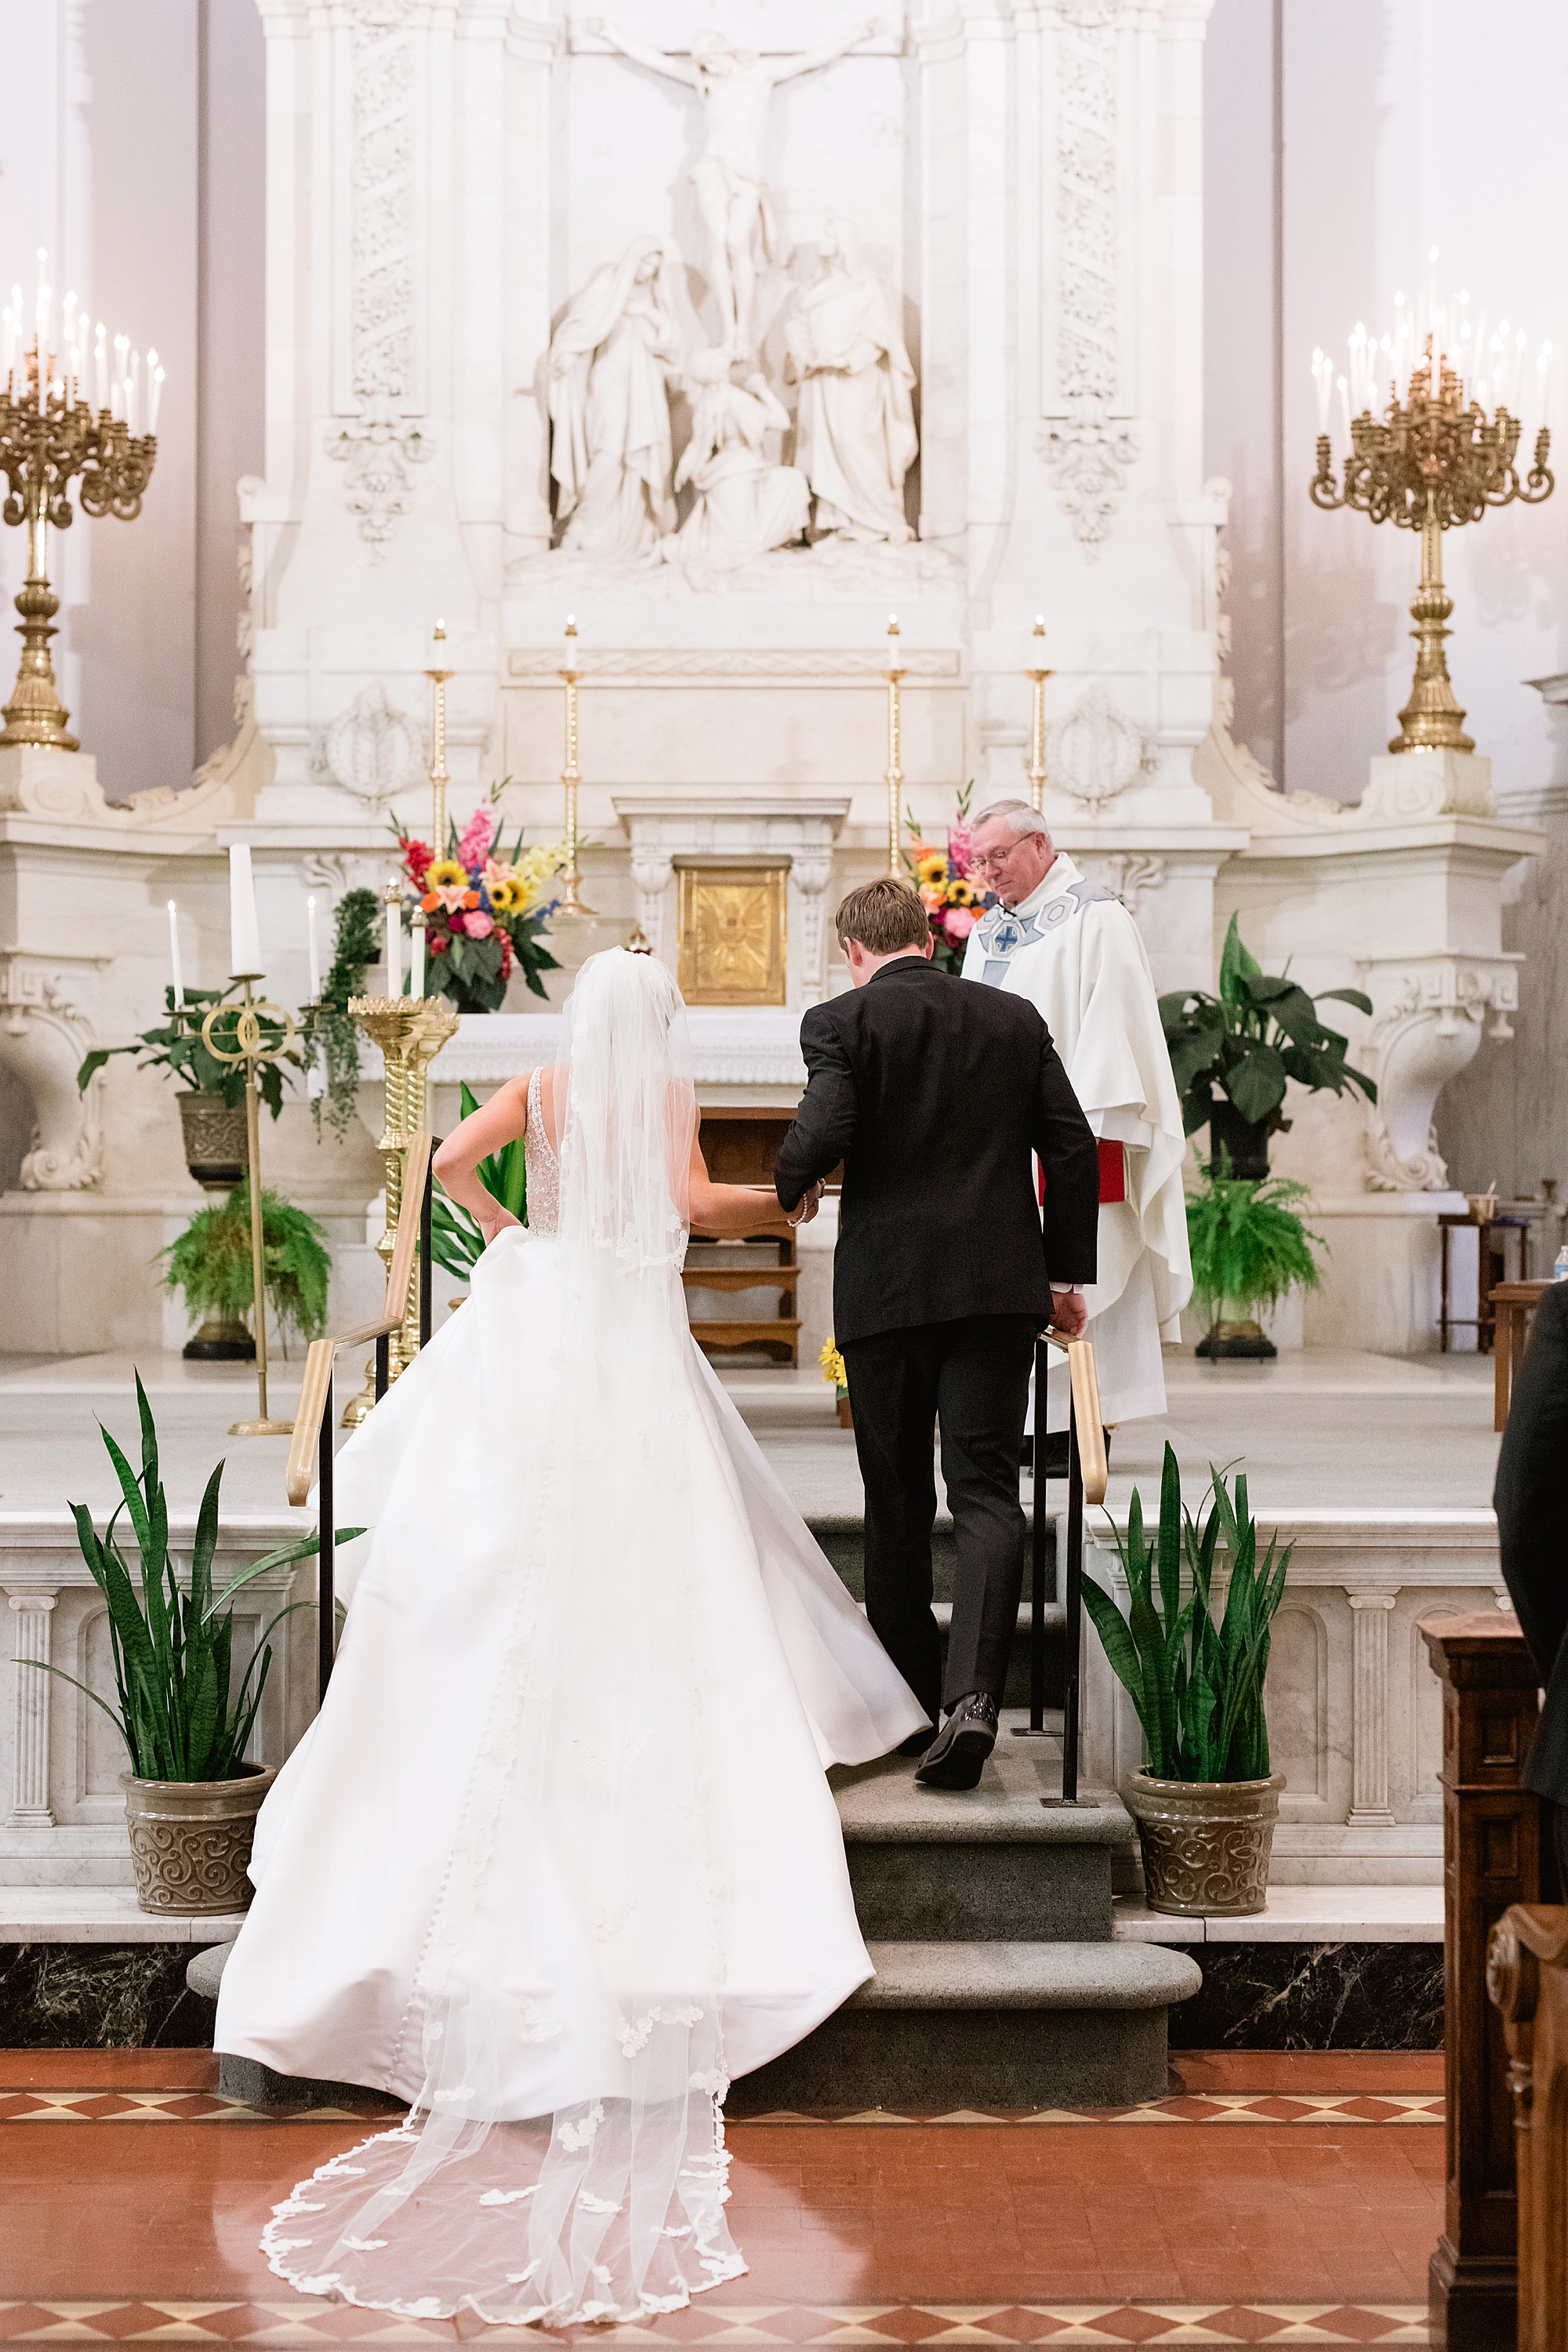 An elegant lavender and ivory wedding at the historic Guardian Building in Downtown Detroit, Michigan by Breanne Rochelle Photography.